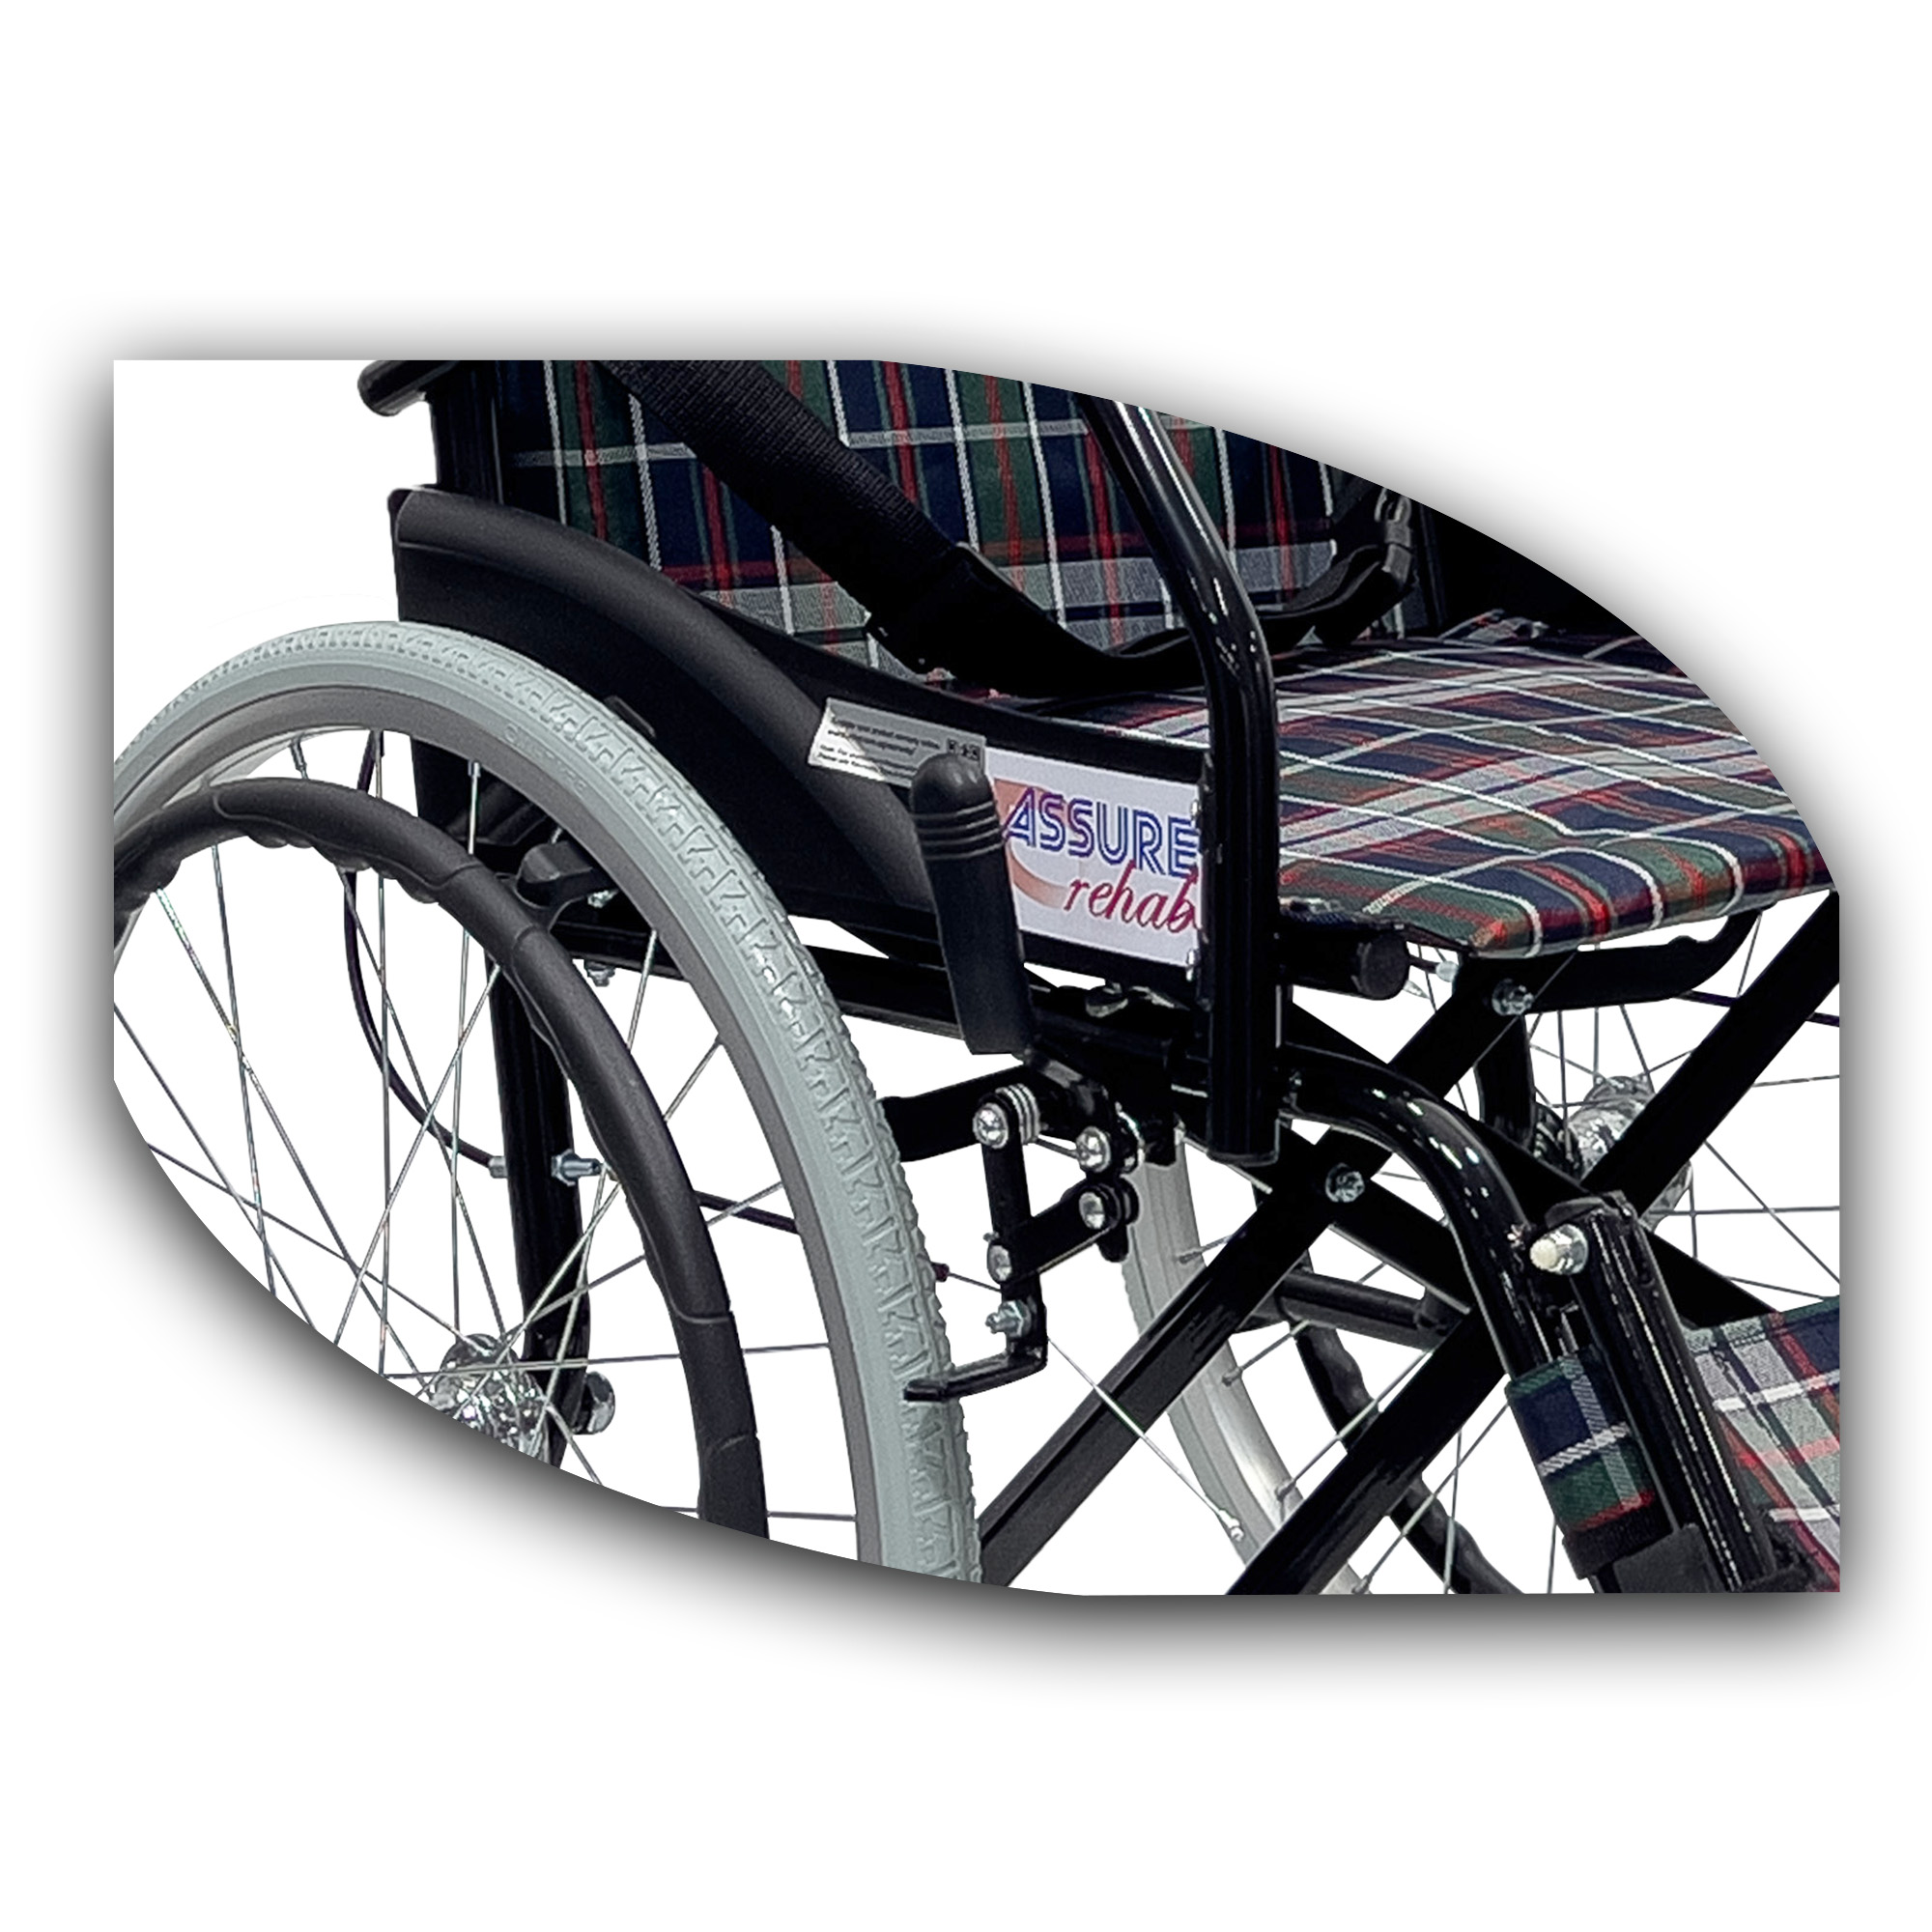 ASSURE REHAB Wheelchair with Flip-Up Footrest singapore